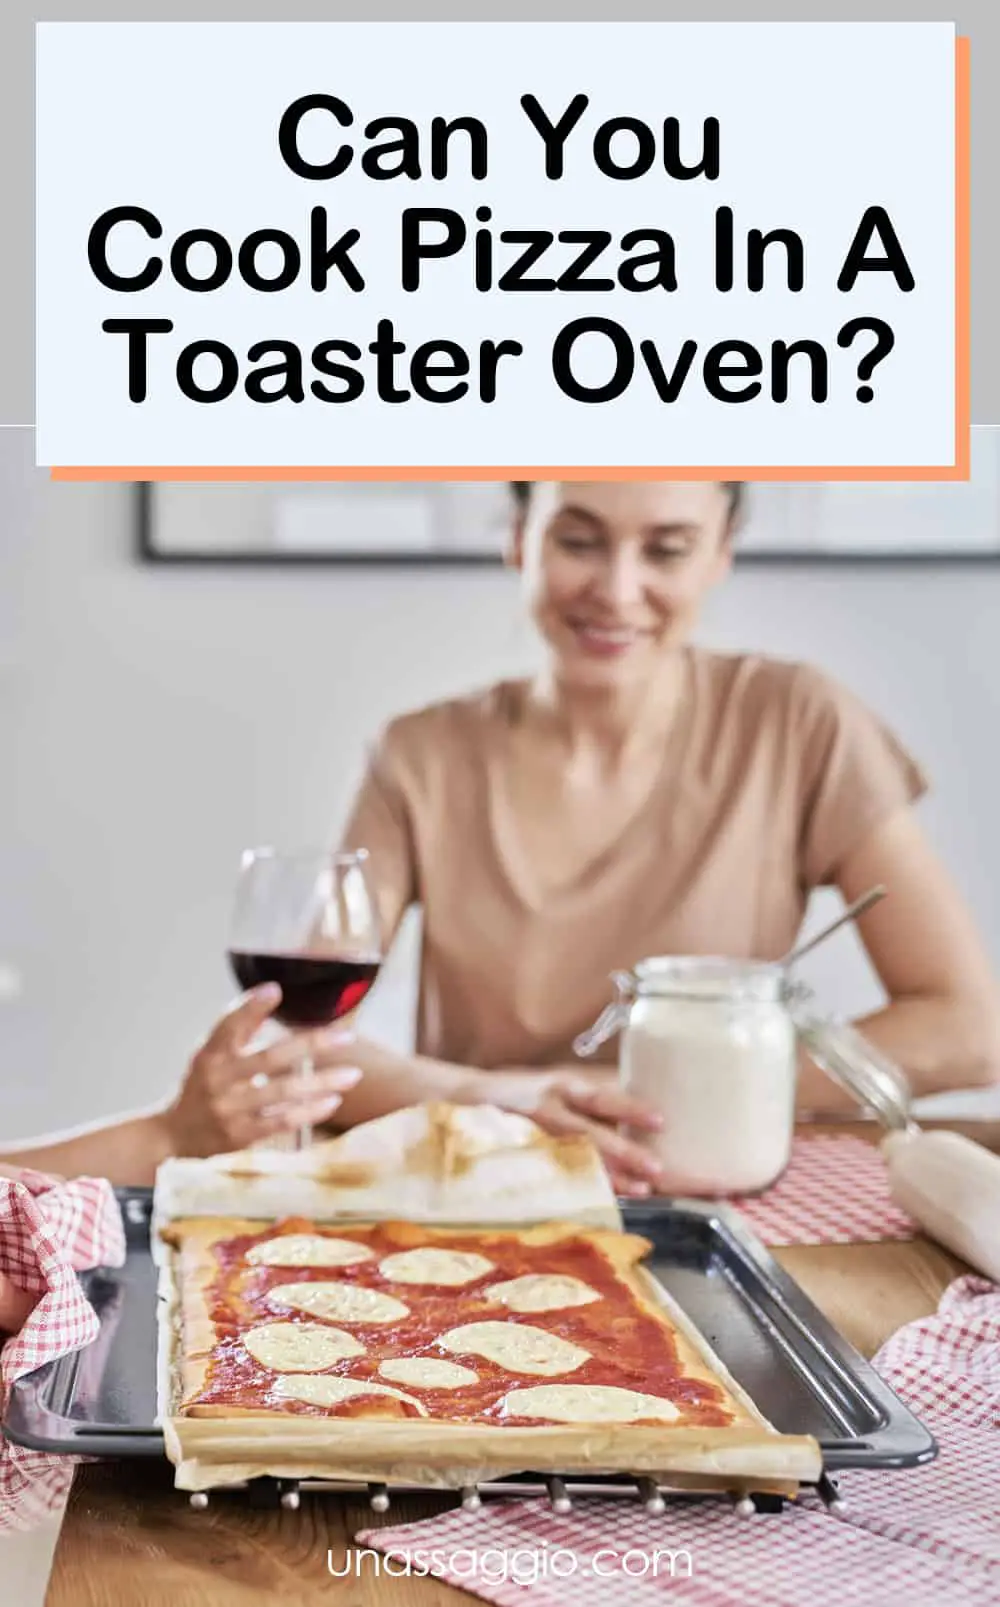 Can You Cook Pizza In A Toaster Oven?